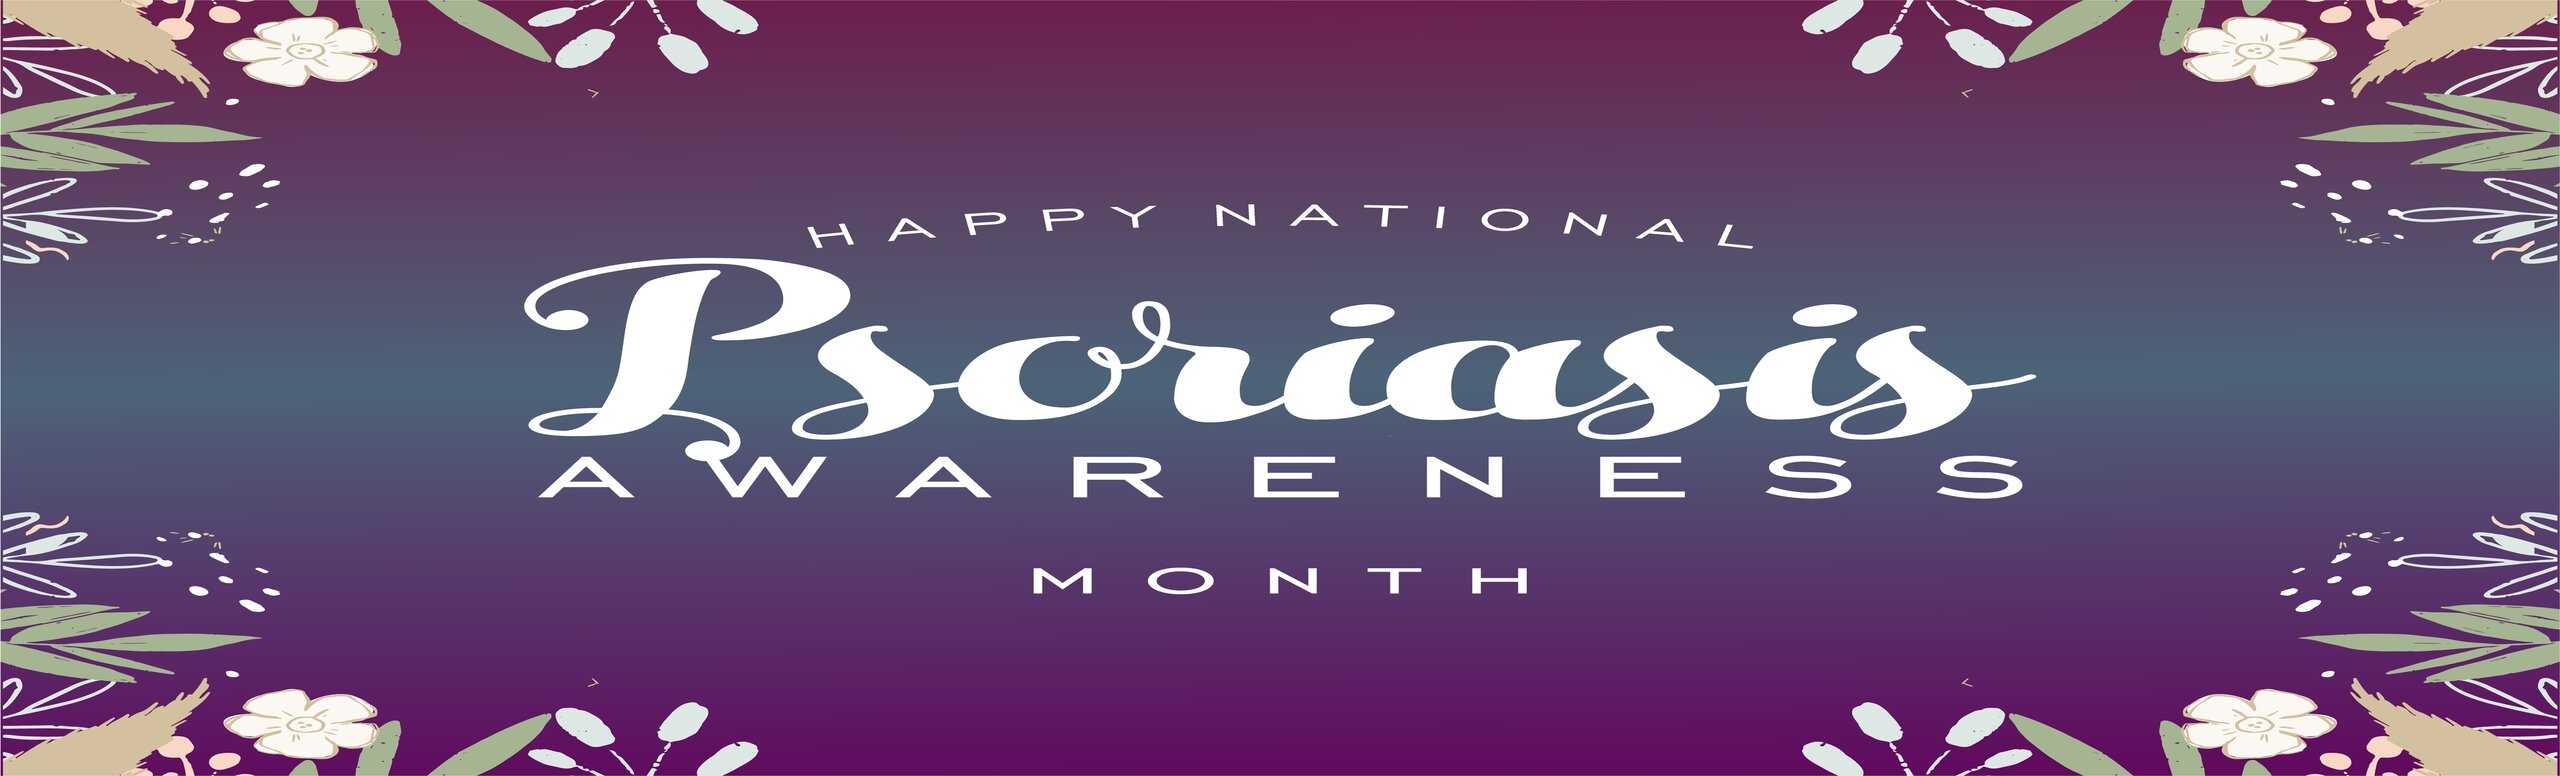 Banner graphic of some flowers. Banner says:

HAPPY NATIONAL Psoriasis AWARENESS MONTH